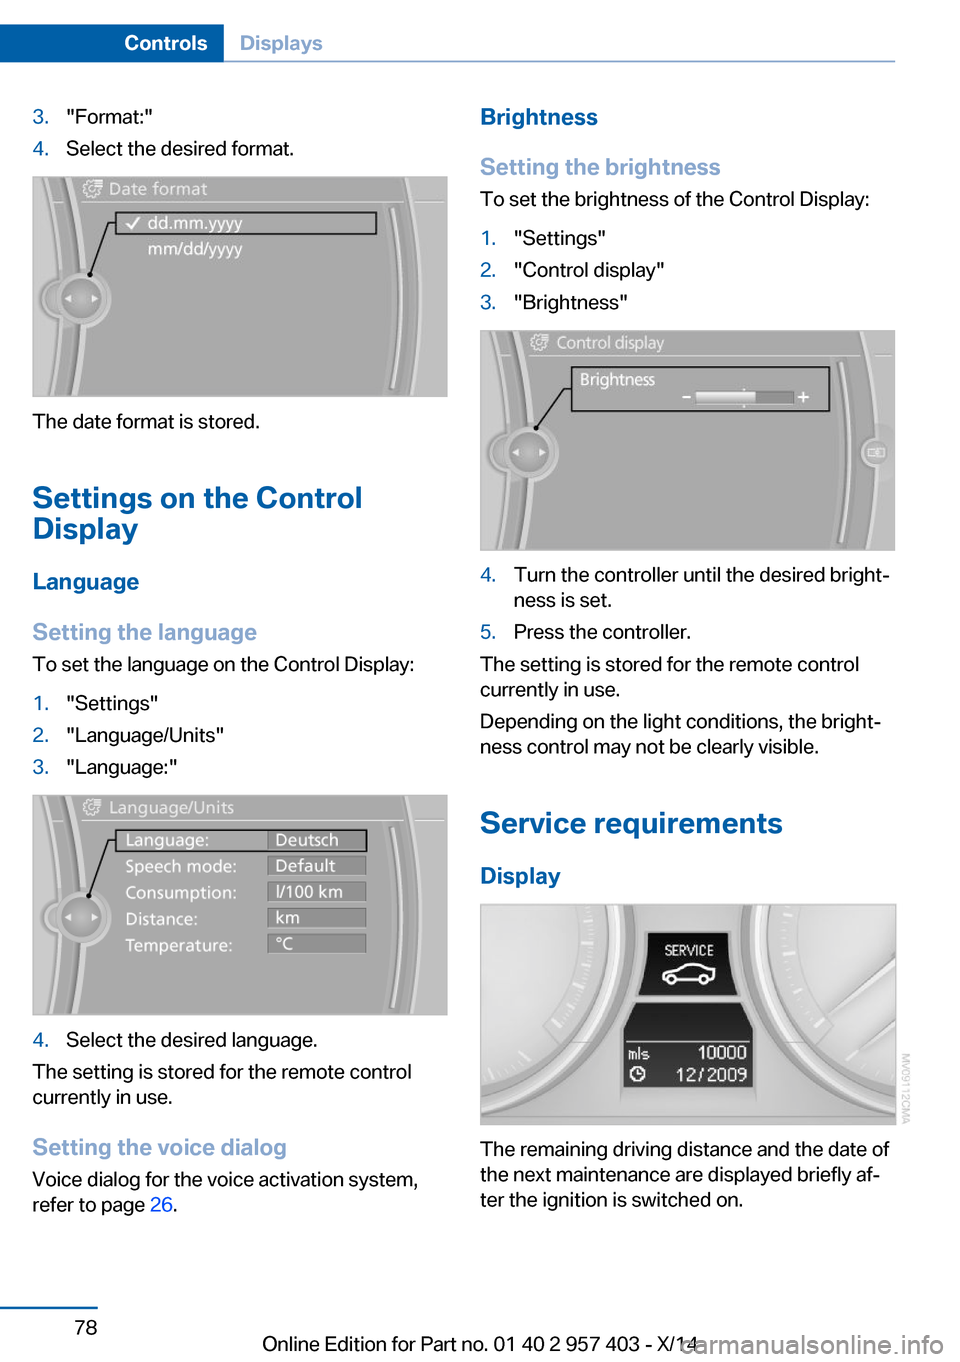 BMW Z4 2014 E89 Owners Manual 3."Format:"4.Select the desired format.
The date format is stored.
Settings on the Control
Display
Language
Setting the language
To set the language on the Control Display:
1."Settings"2."Language/Uni